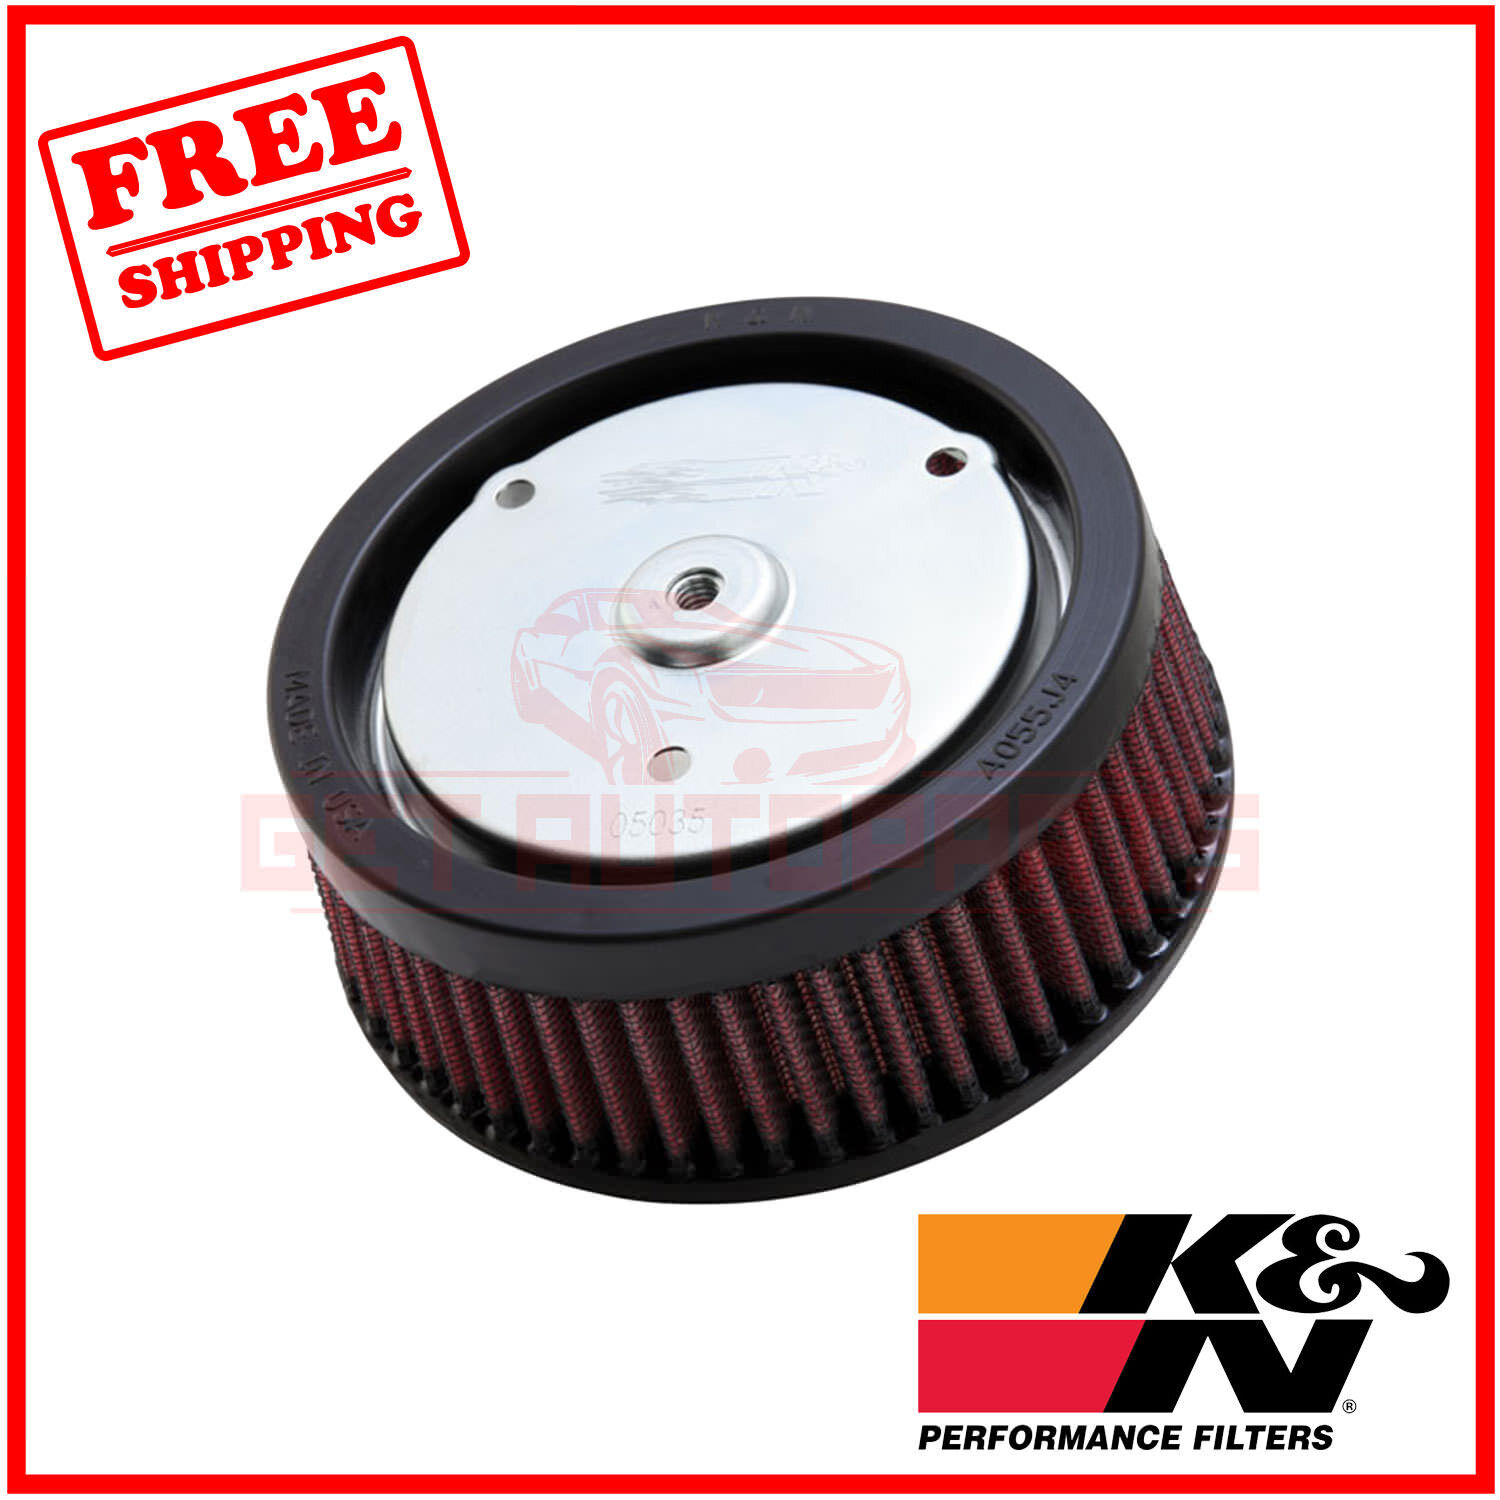 K&N Replacement Air Filter for Harley Davidson FLHTI Electra Glide 2004-2006